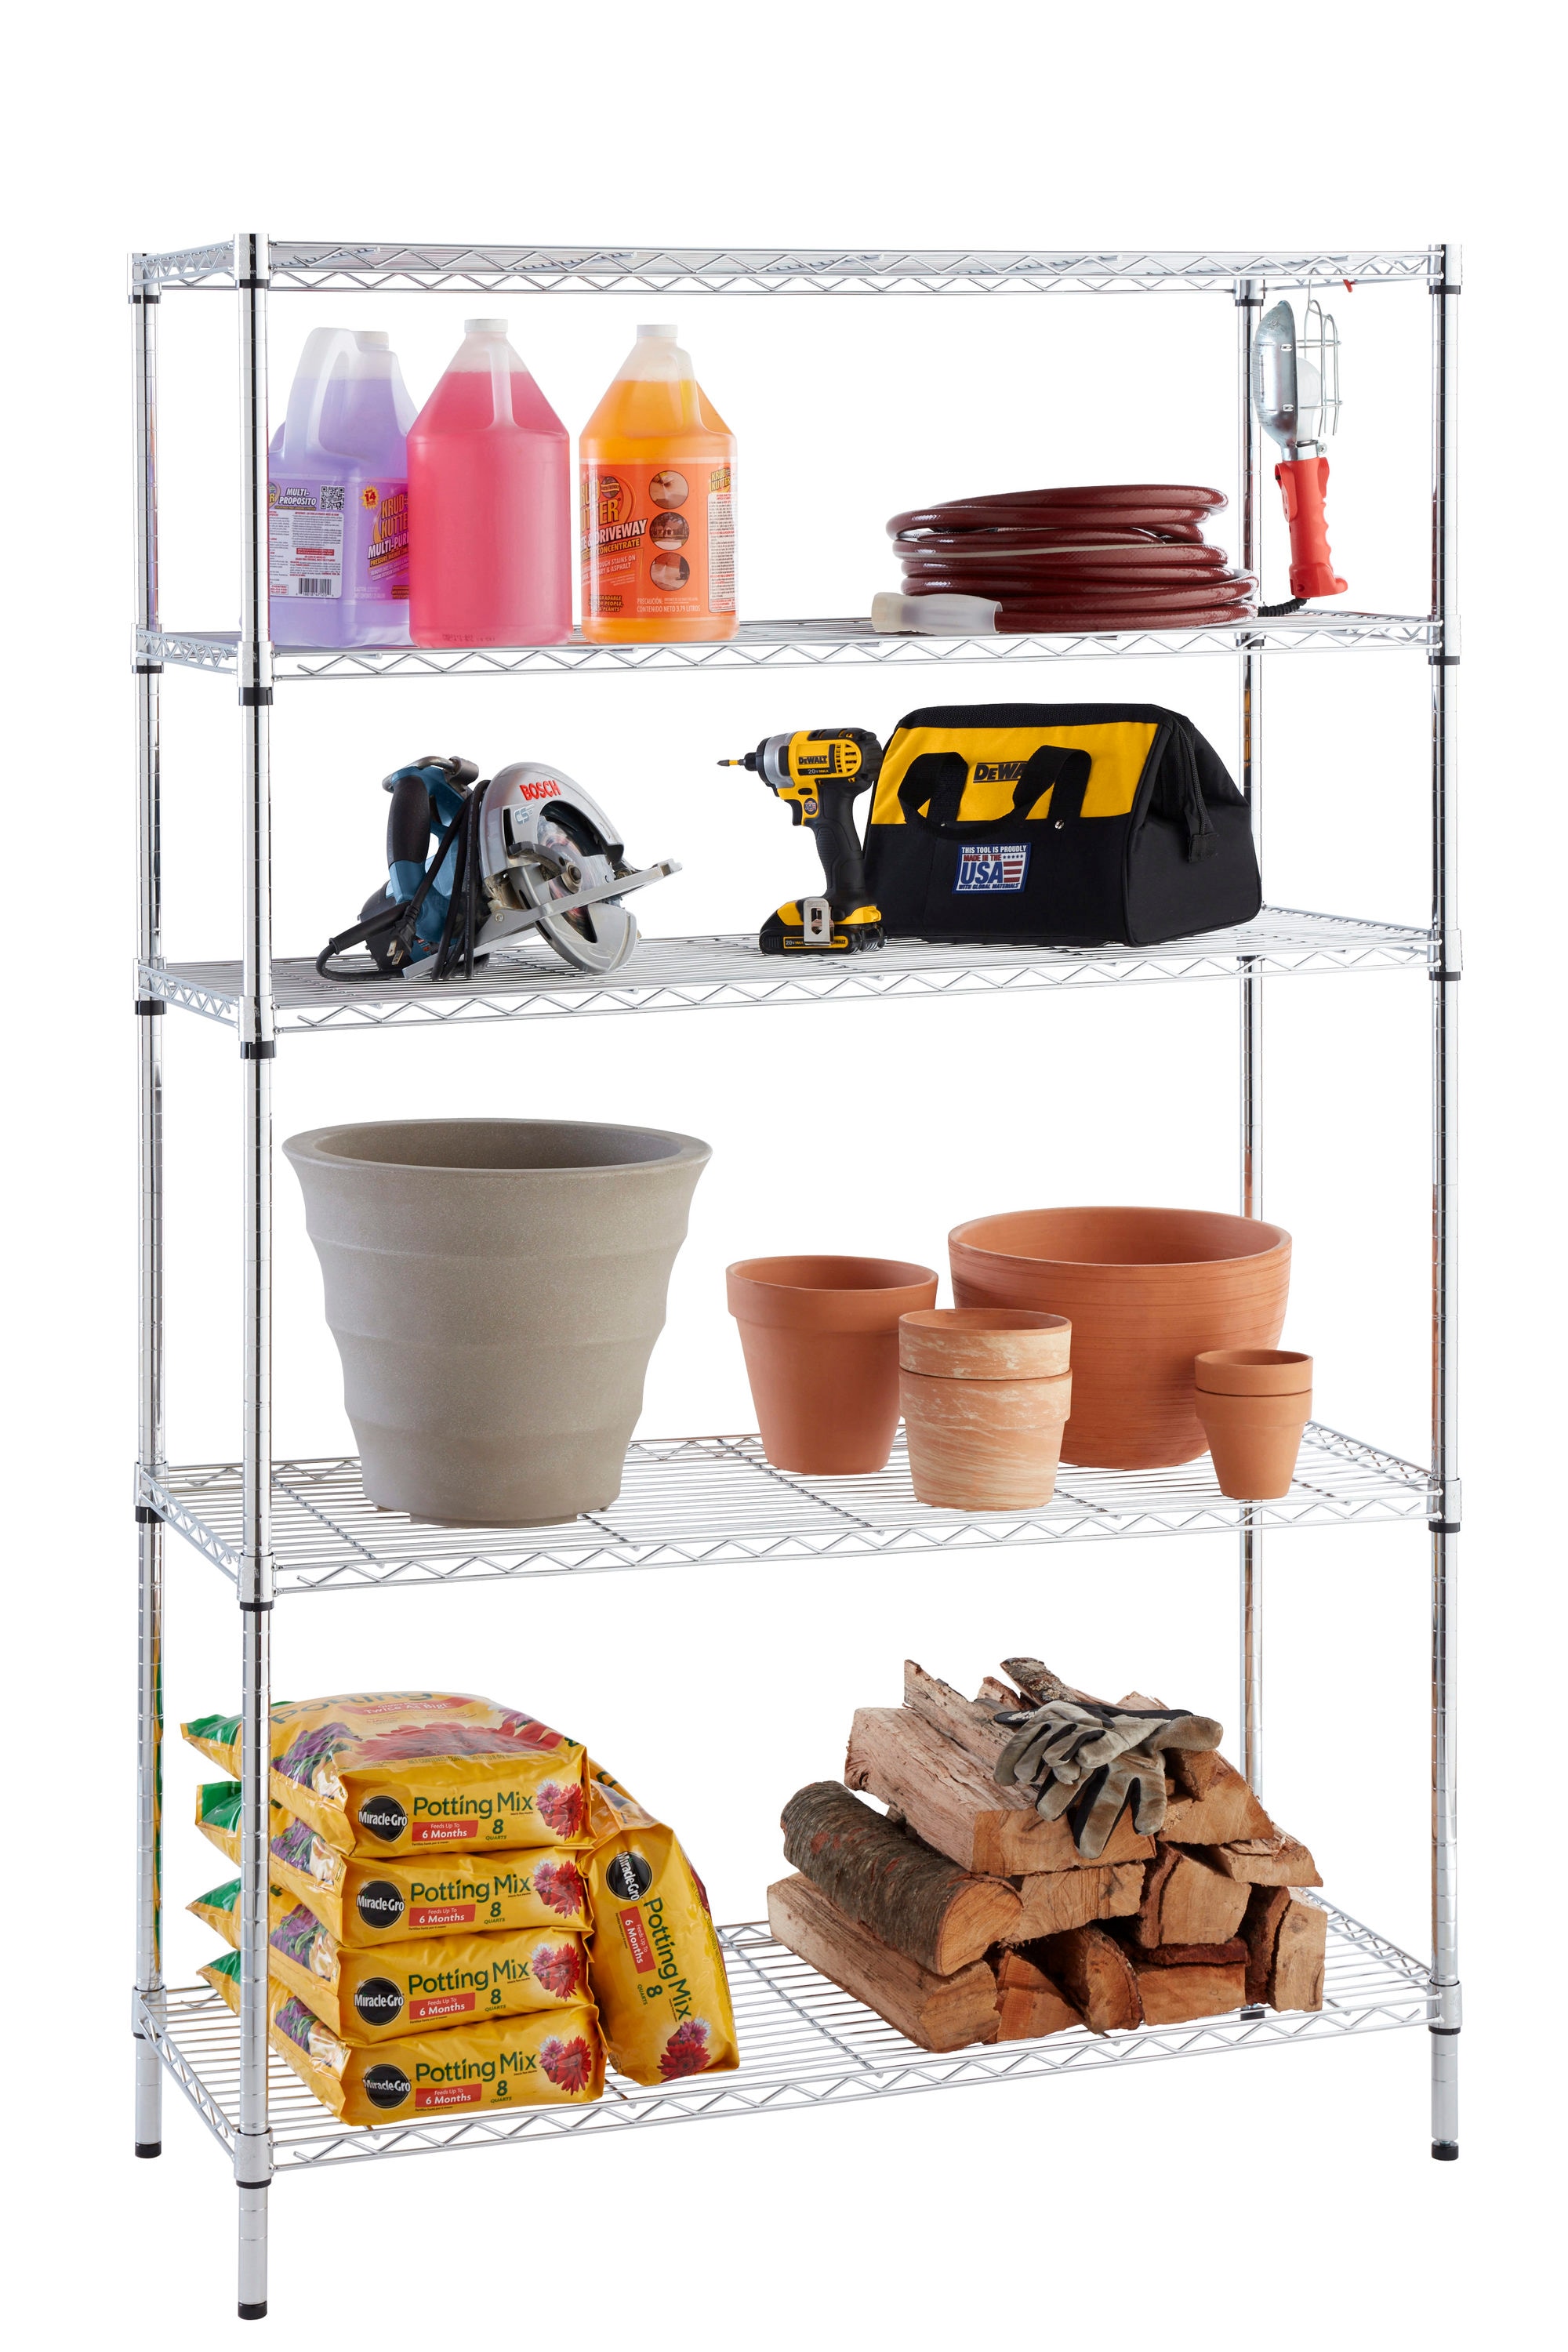 Freestanding Shelving Units, Style Selections 5 Tier Shelving Unit Instructions